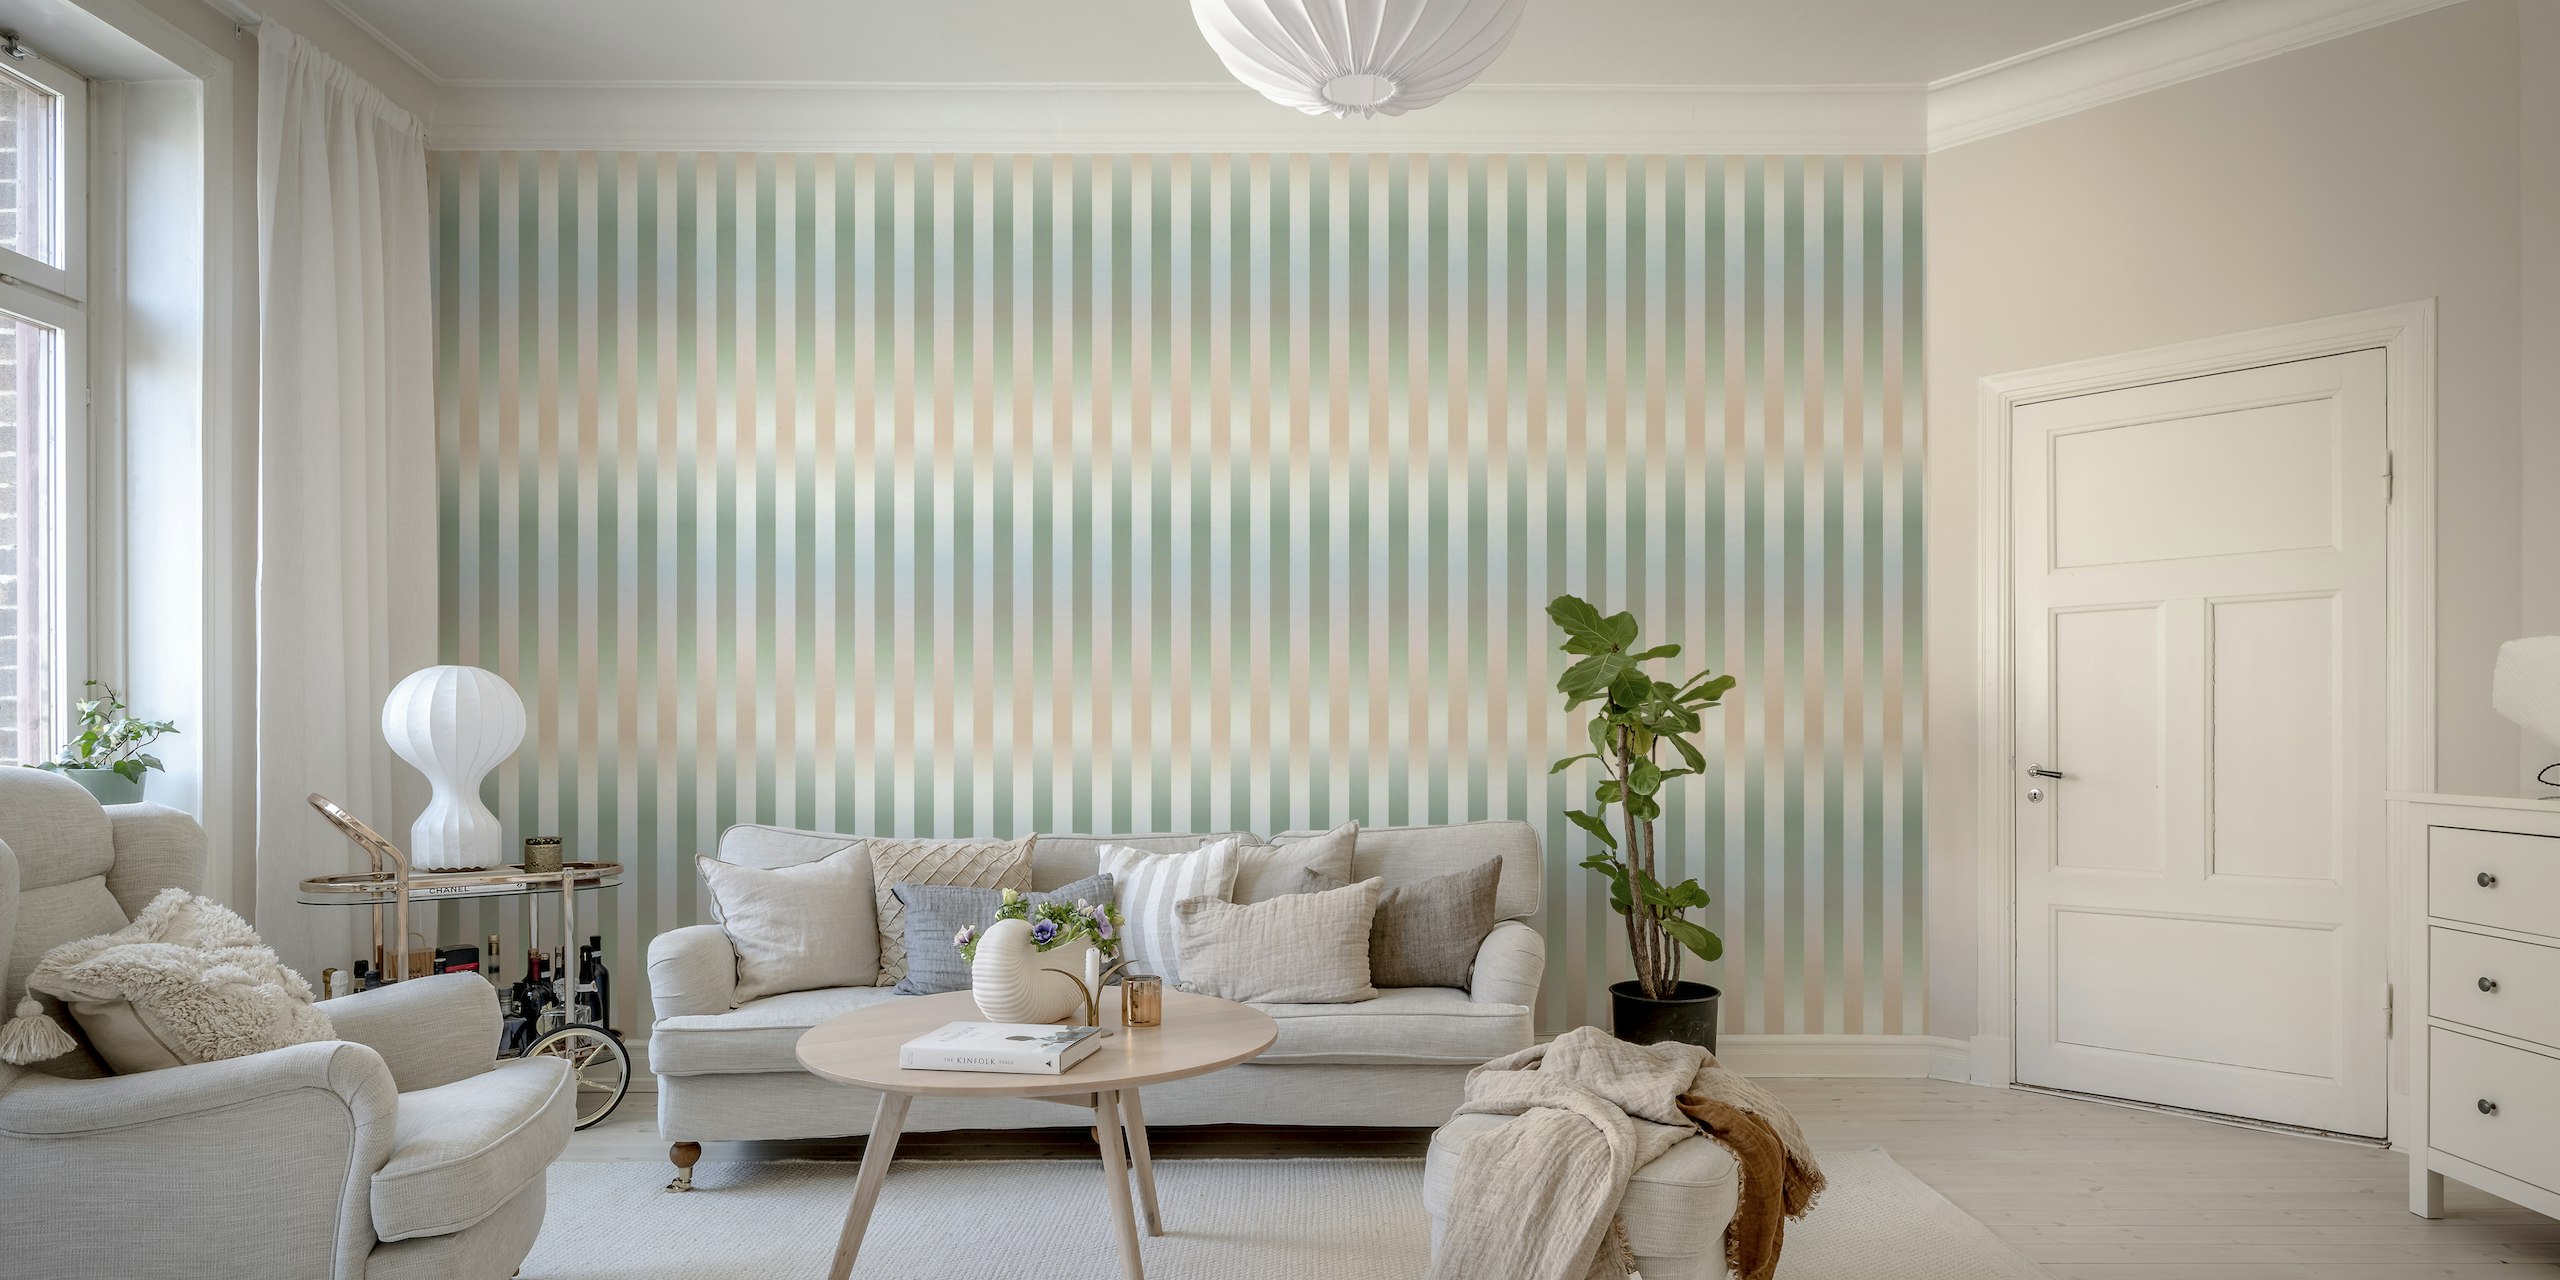 Subtle neutral striped wall mural with a soft blurred effect